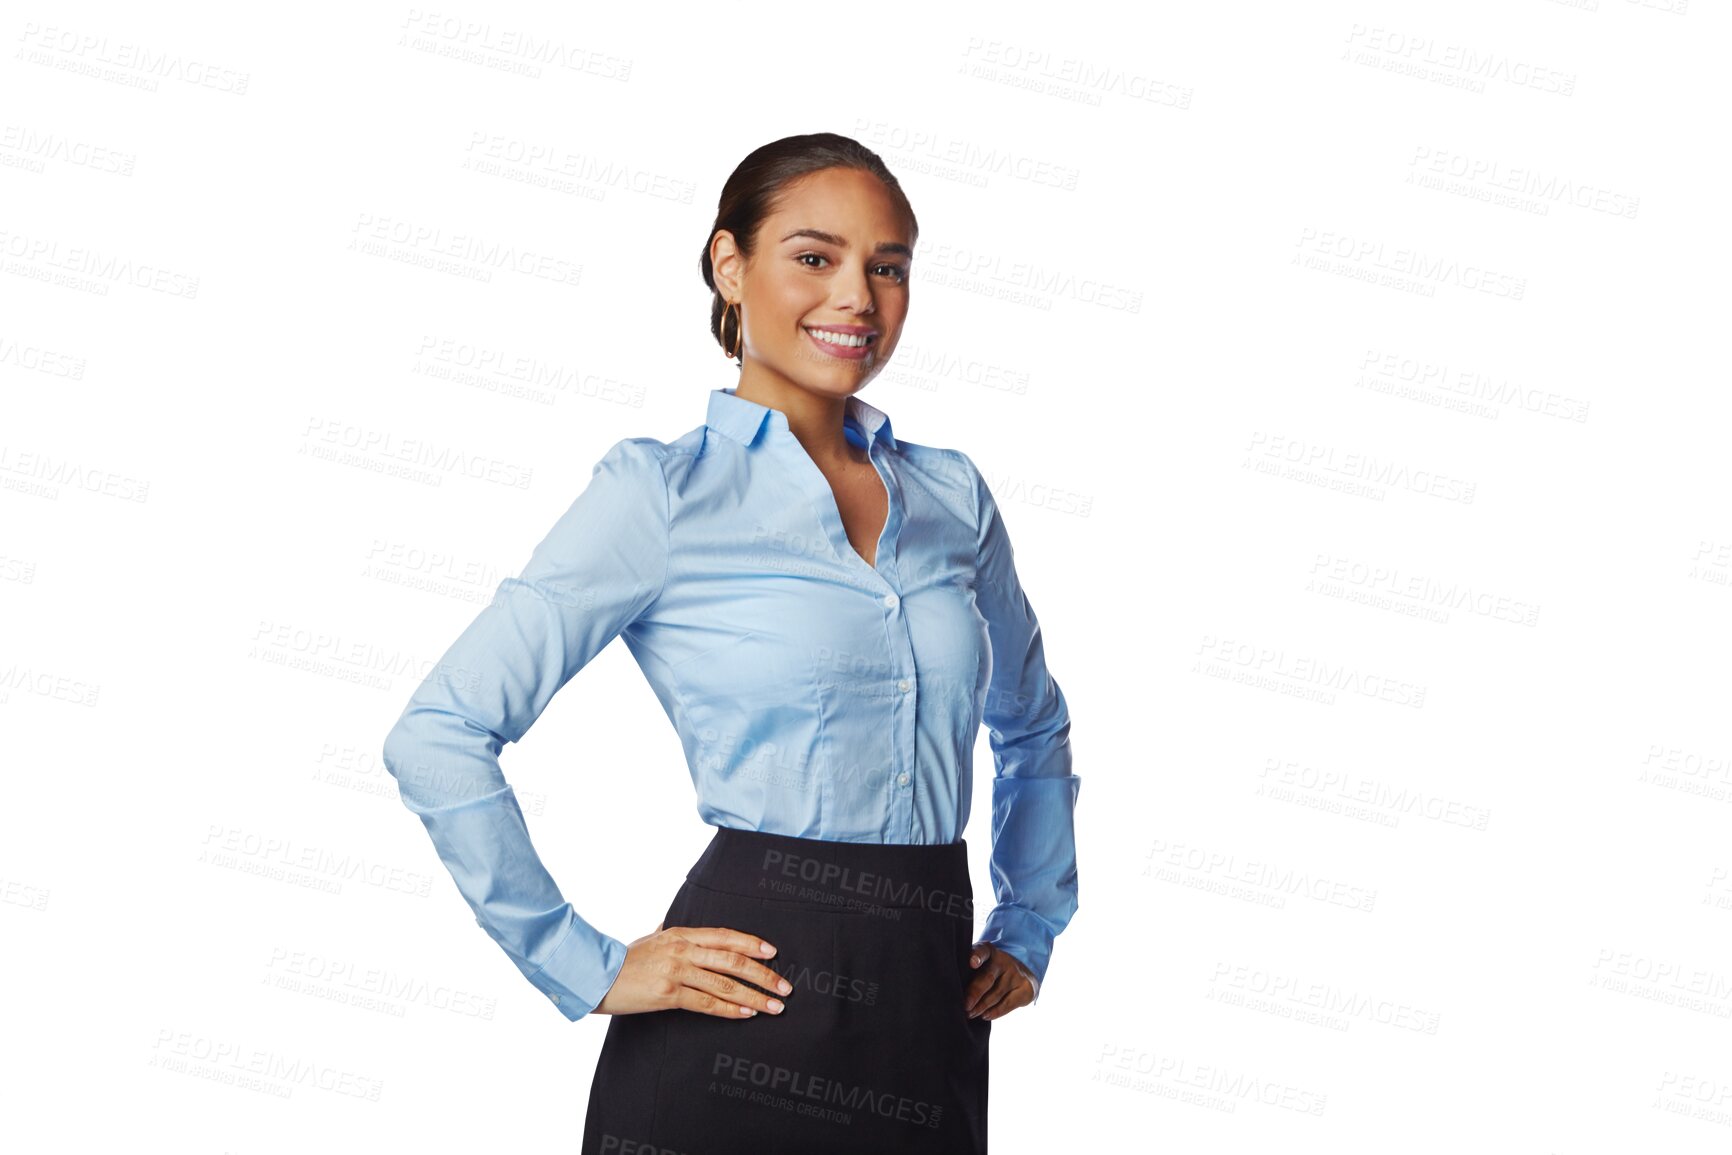 Buy stock photo Hands on hip, portrait and business woman isolated on a transparent png background. Professional, happiness and confident female person, executive or entrepreneur from Brazil with pride for career.